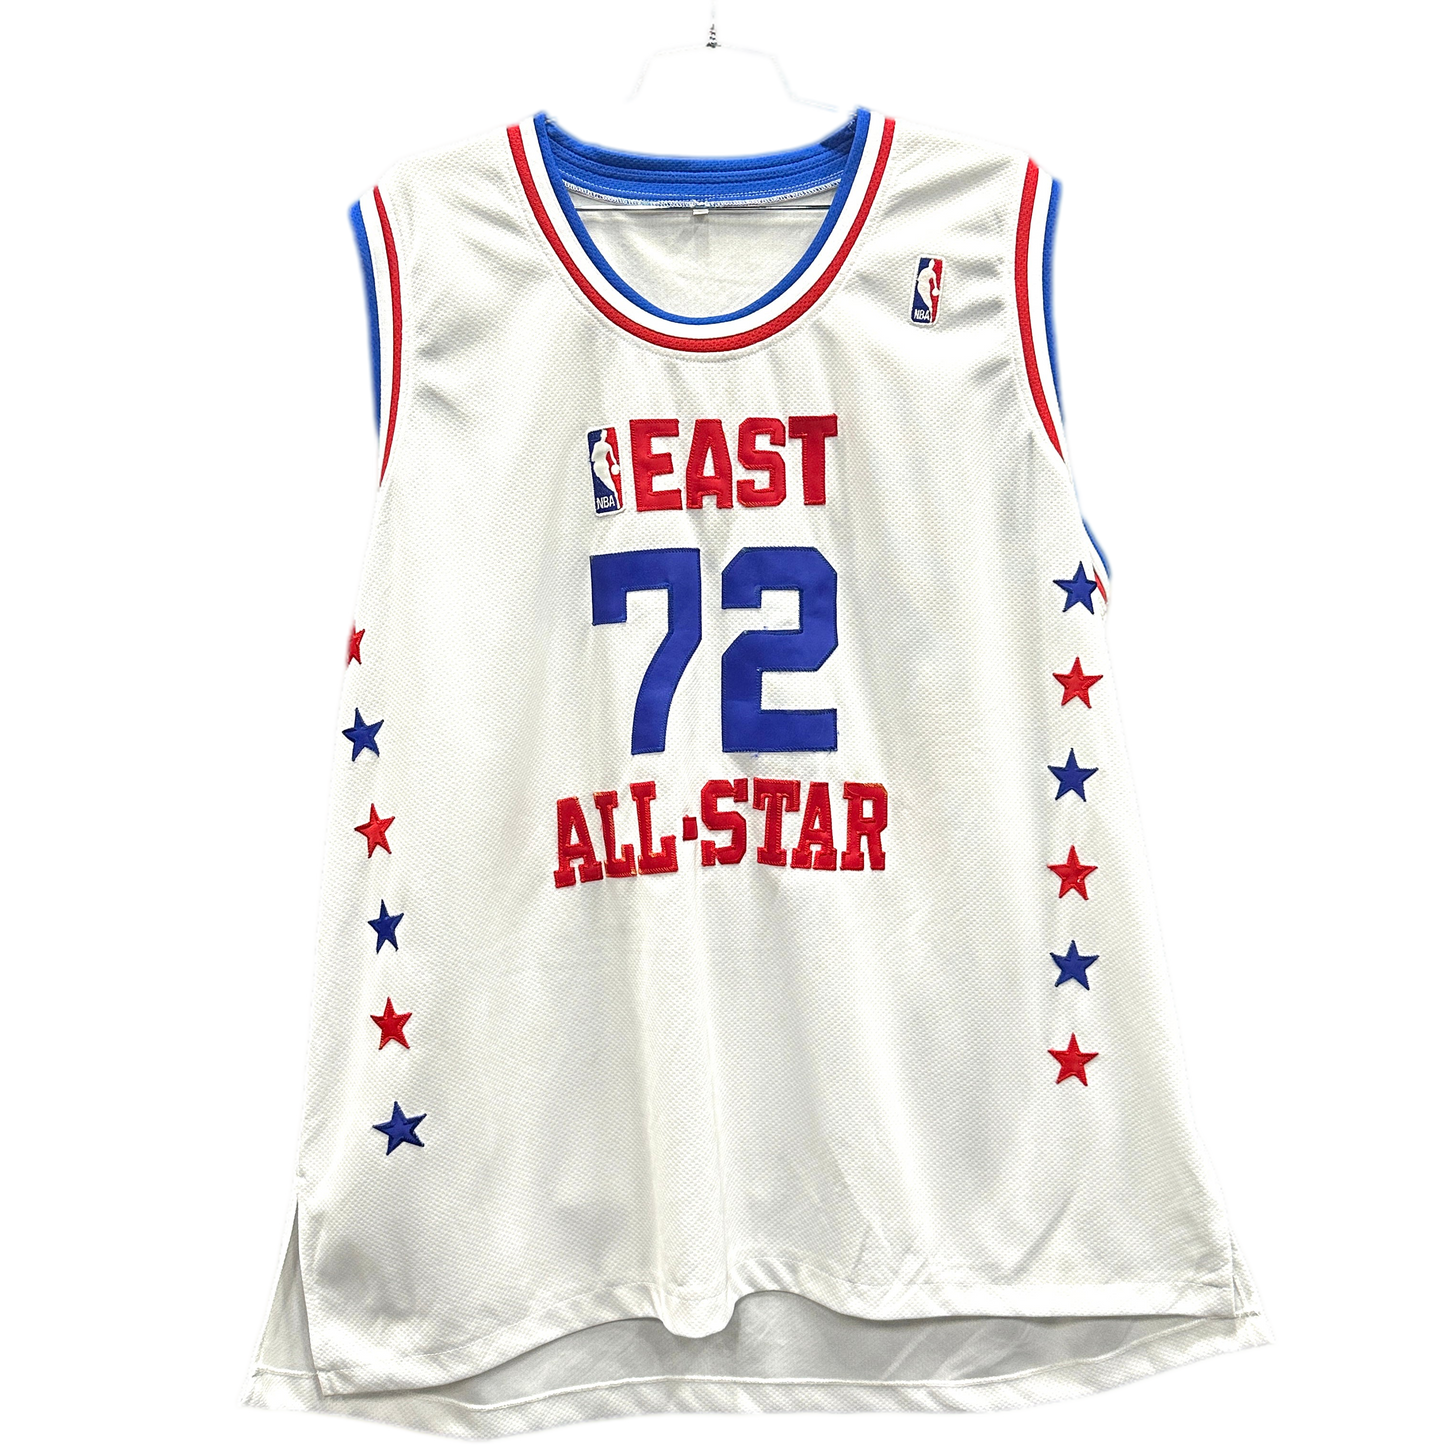 90's Notorious B.I.G East All-Star Sports Jersey sz 2XL